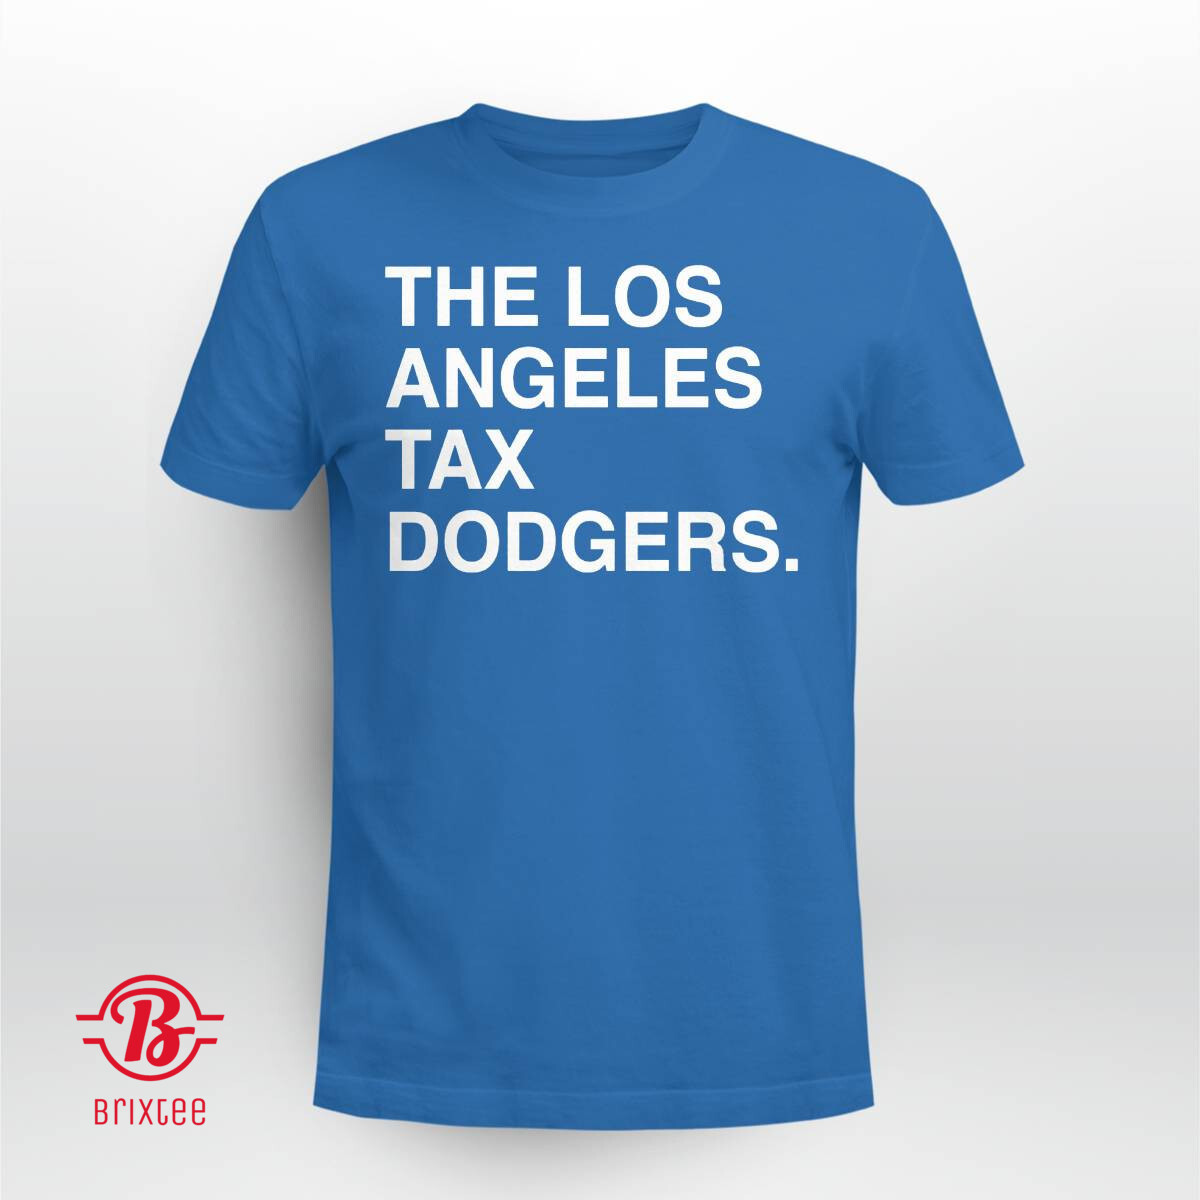 The Los Angeles Tax Dodgers - Los Angeles Dodgers